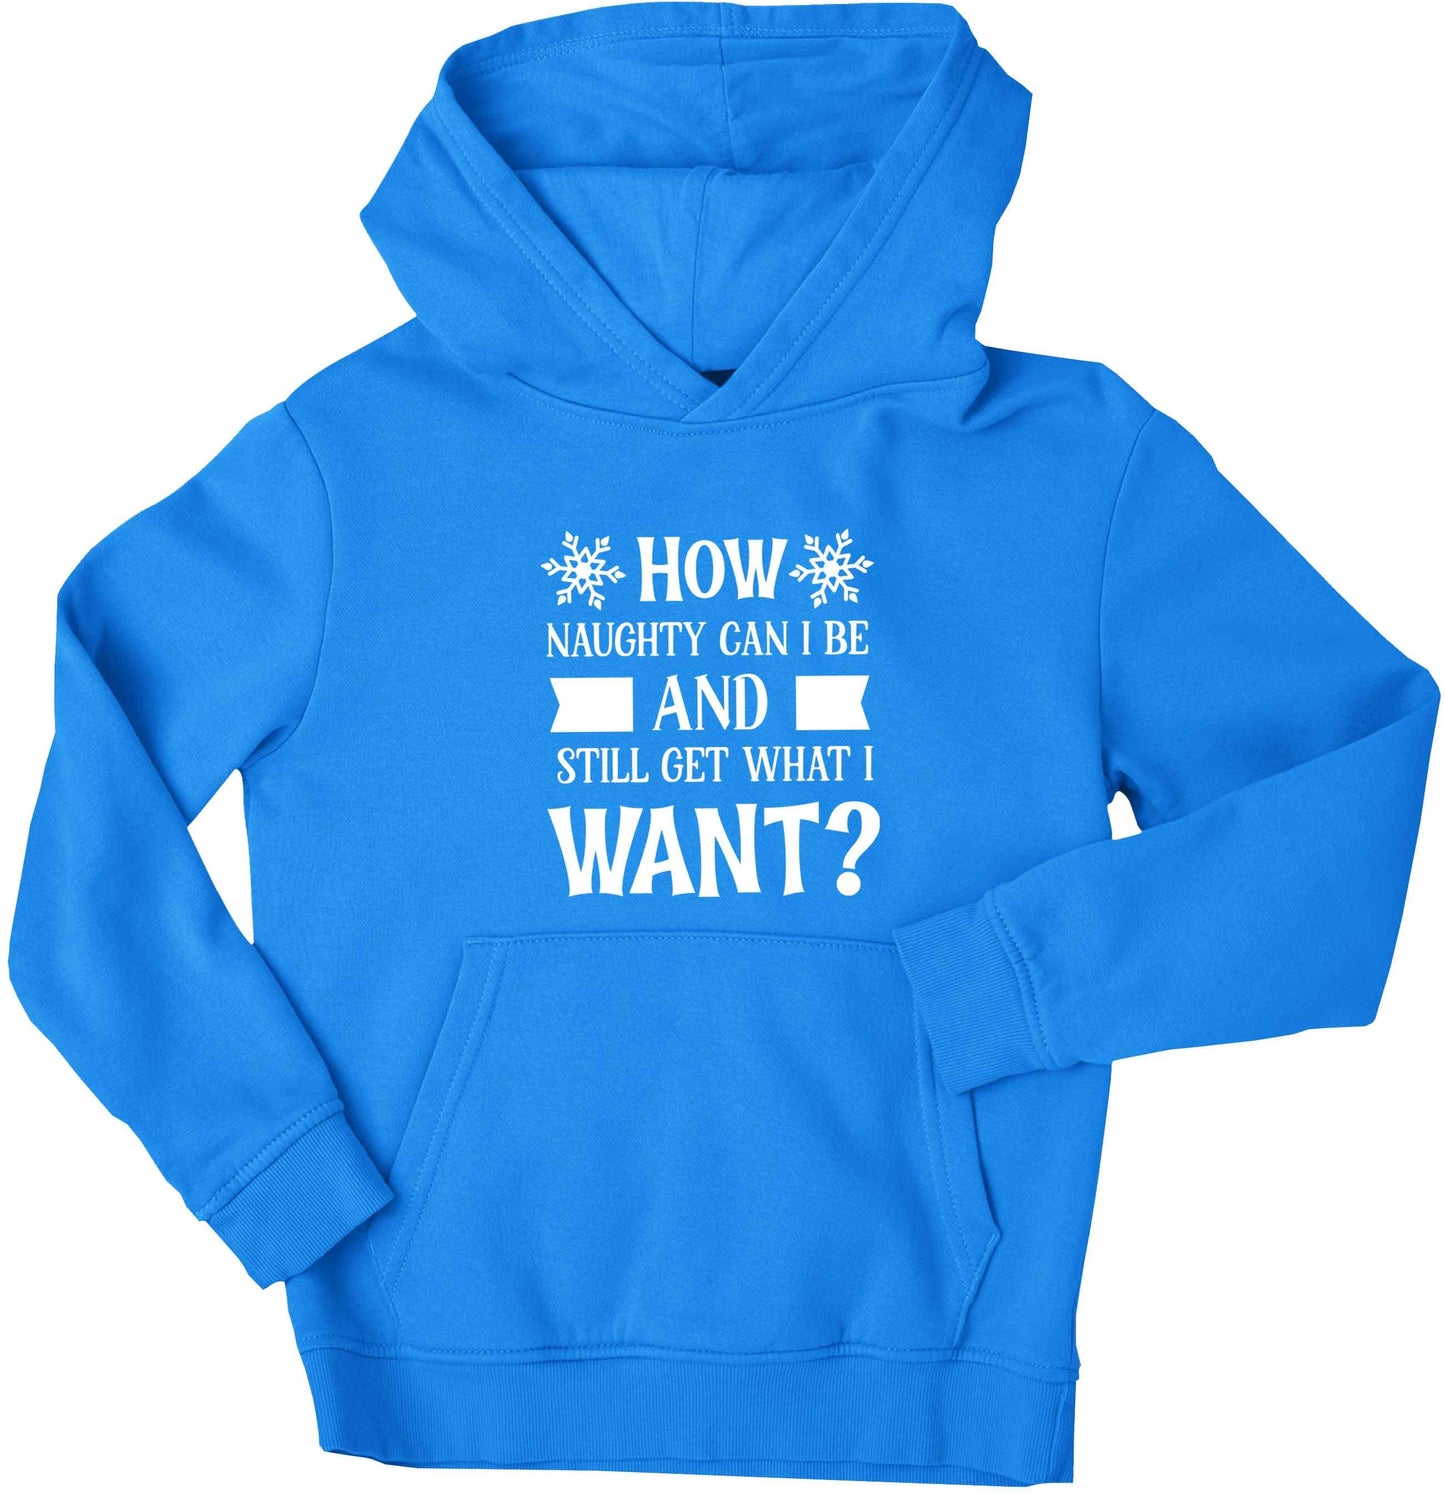 How naughty can I be and still get what I want? children's blue hoodie 12-13 Years